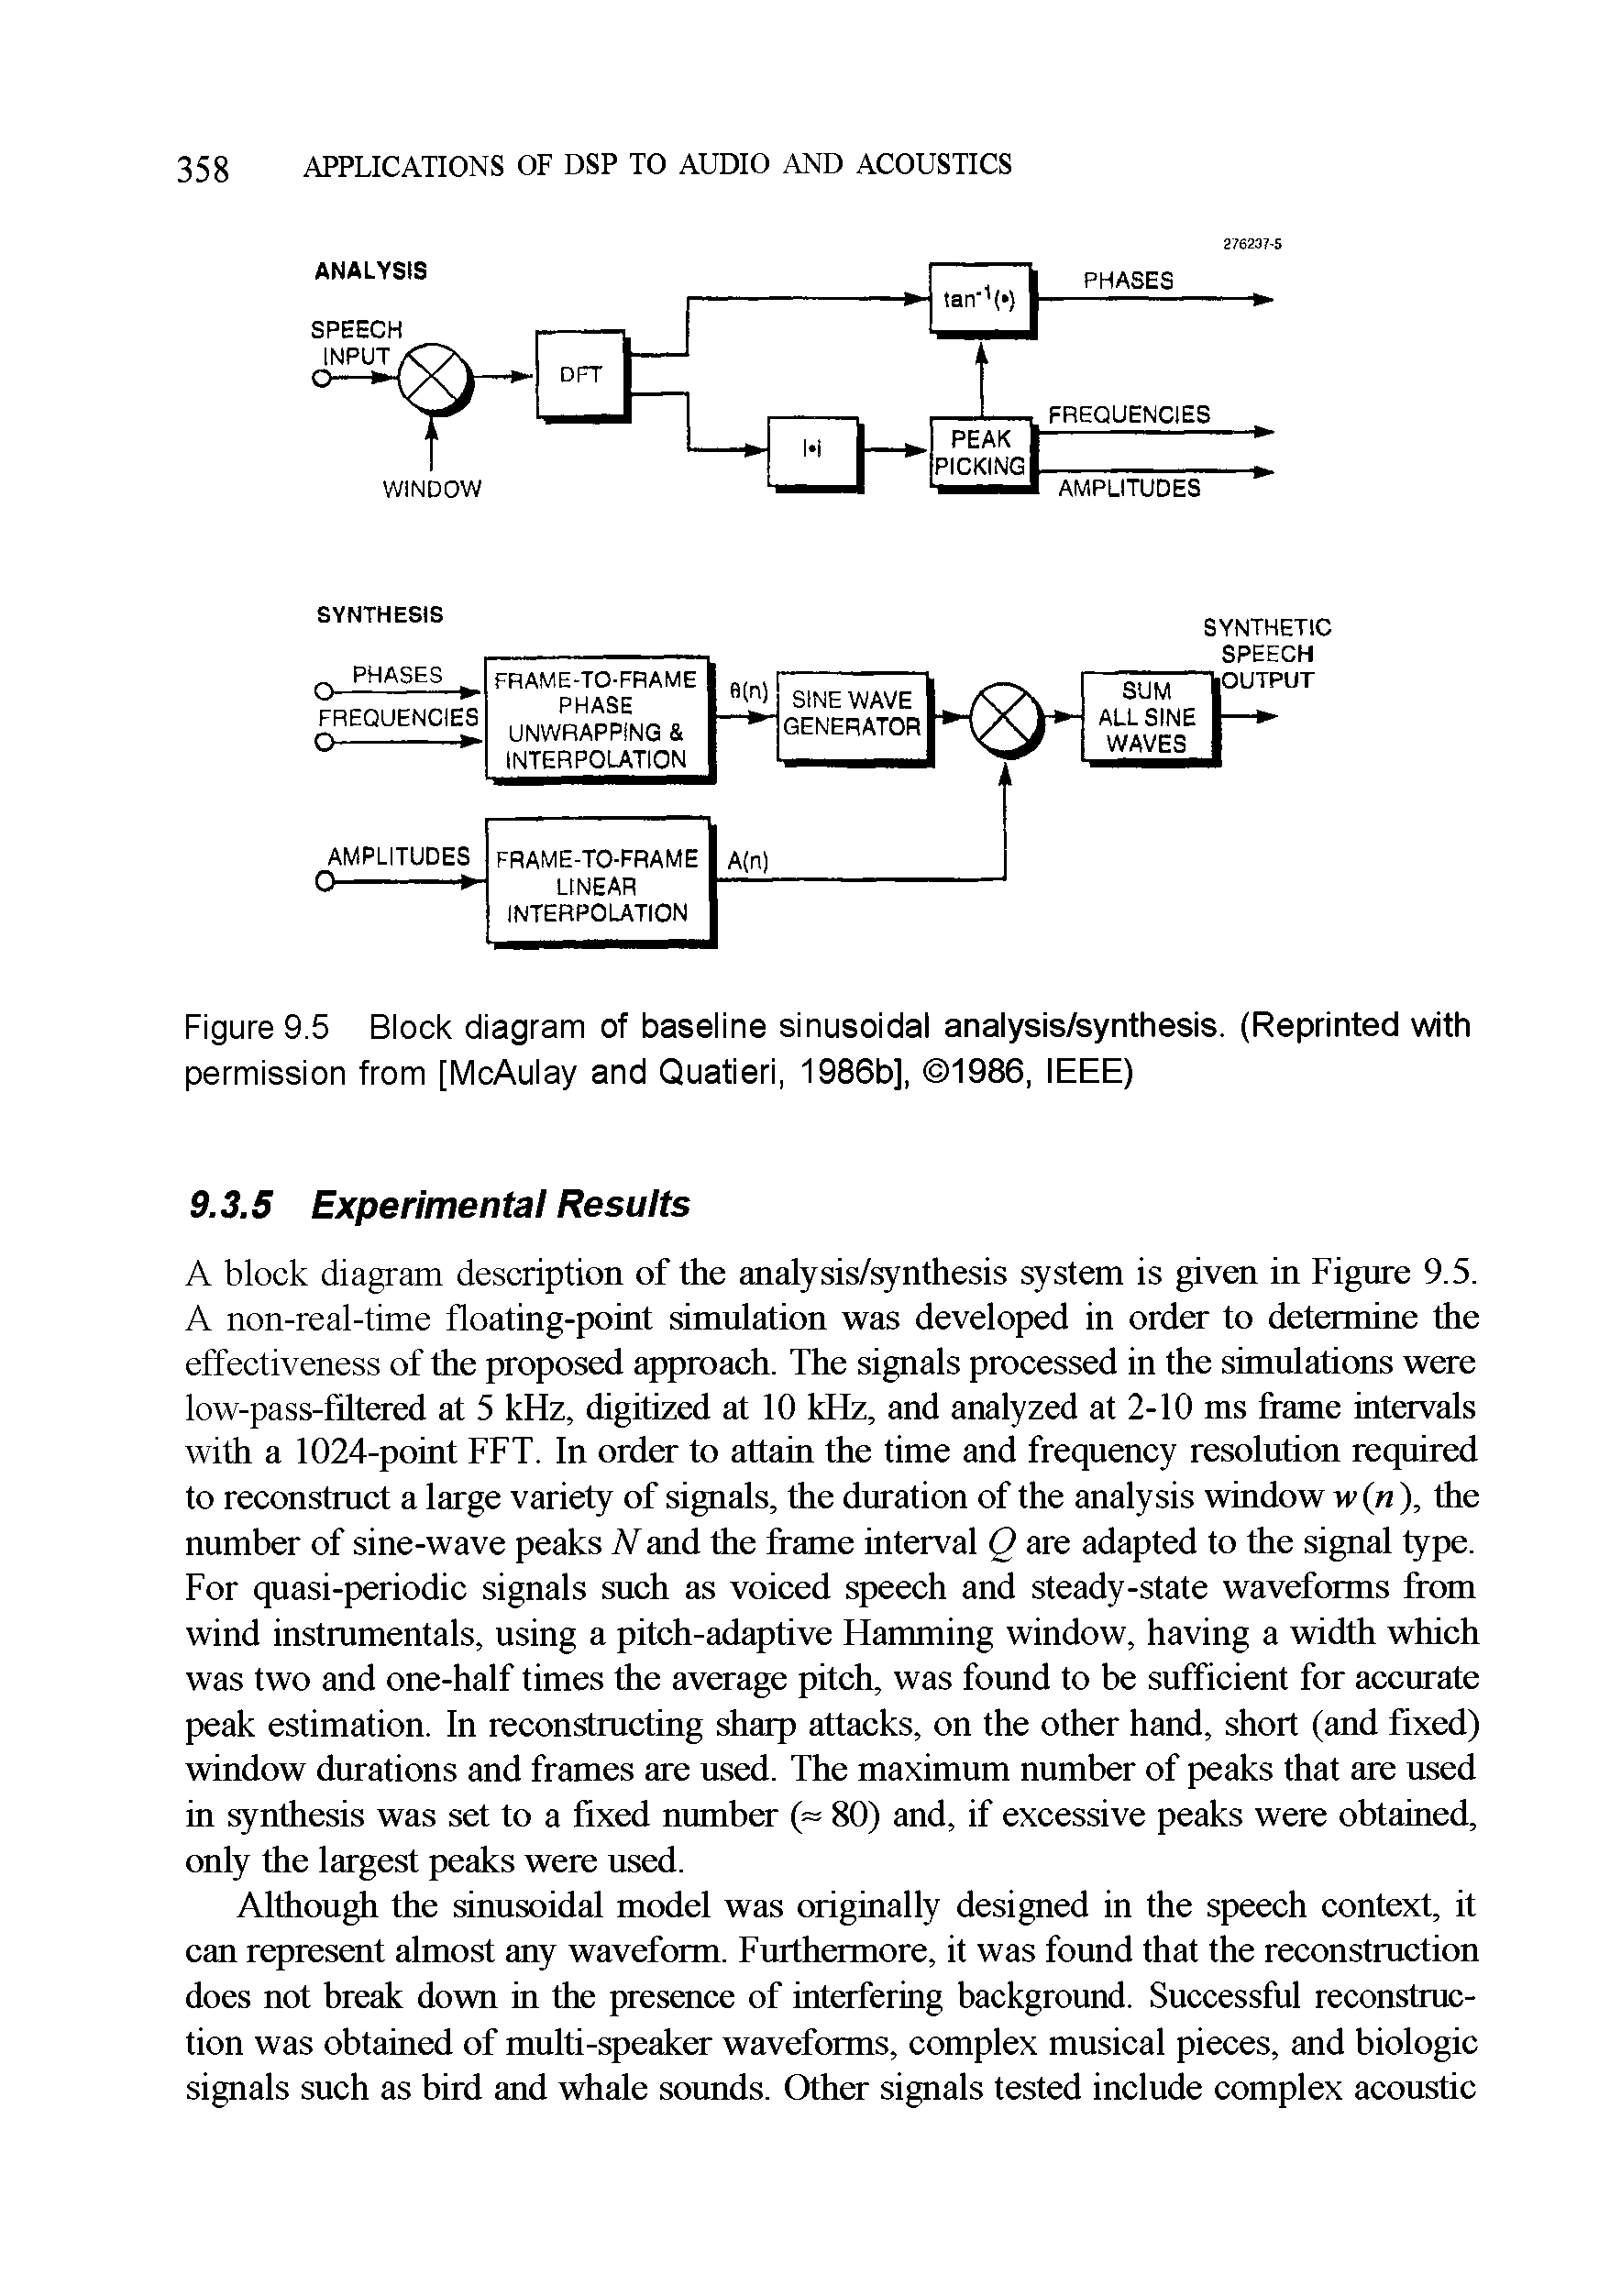 Figure 9.5 Block diagram of baseline sinusoidal analysis/synthesis. (Reprinted with permission from [McAulay and Quatieri, 1986b], 1986, IEEE)...